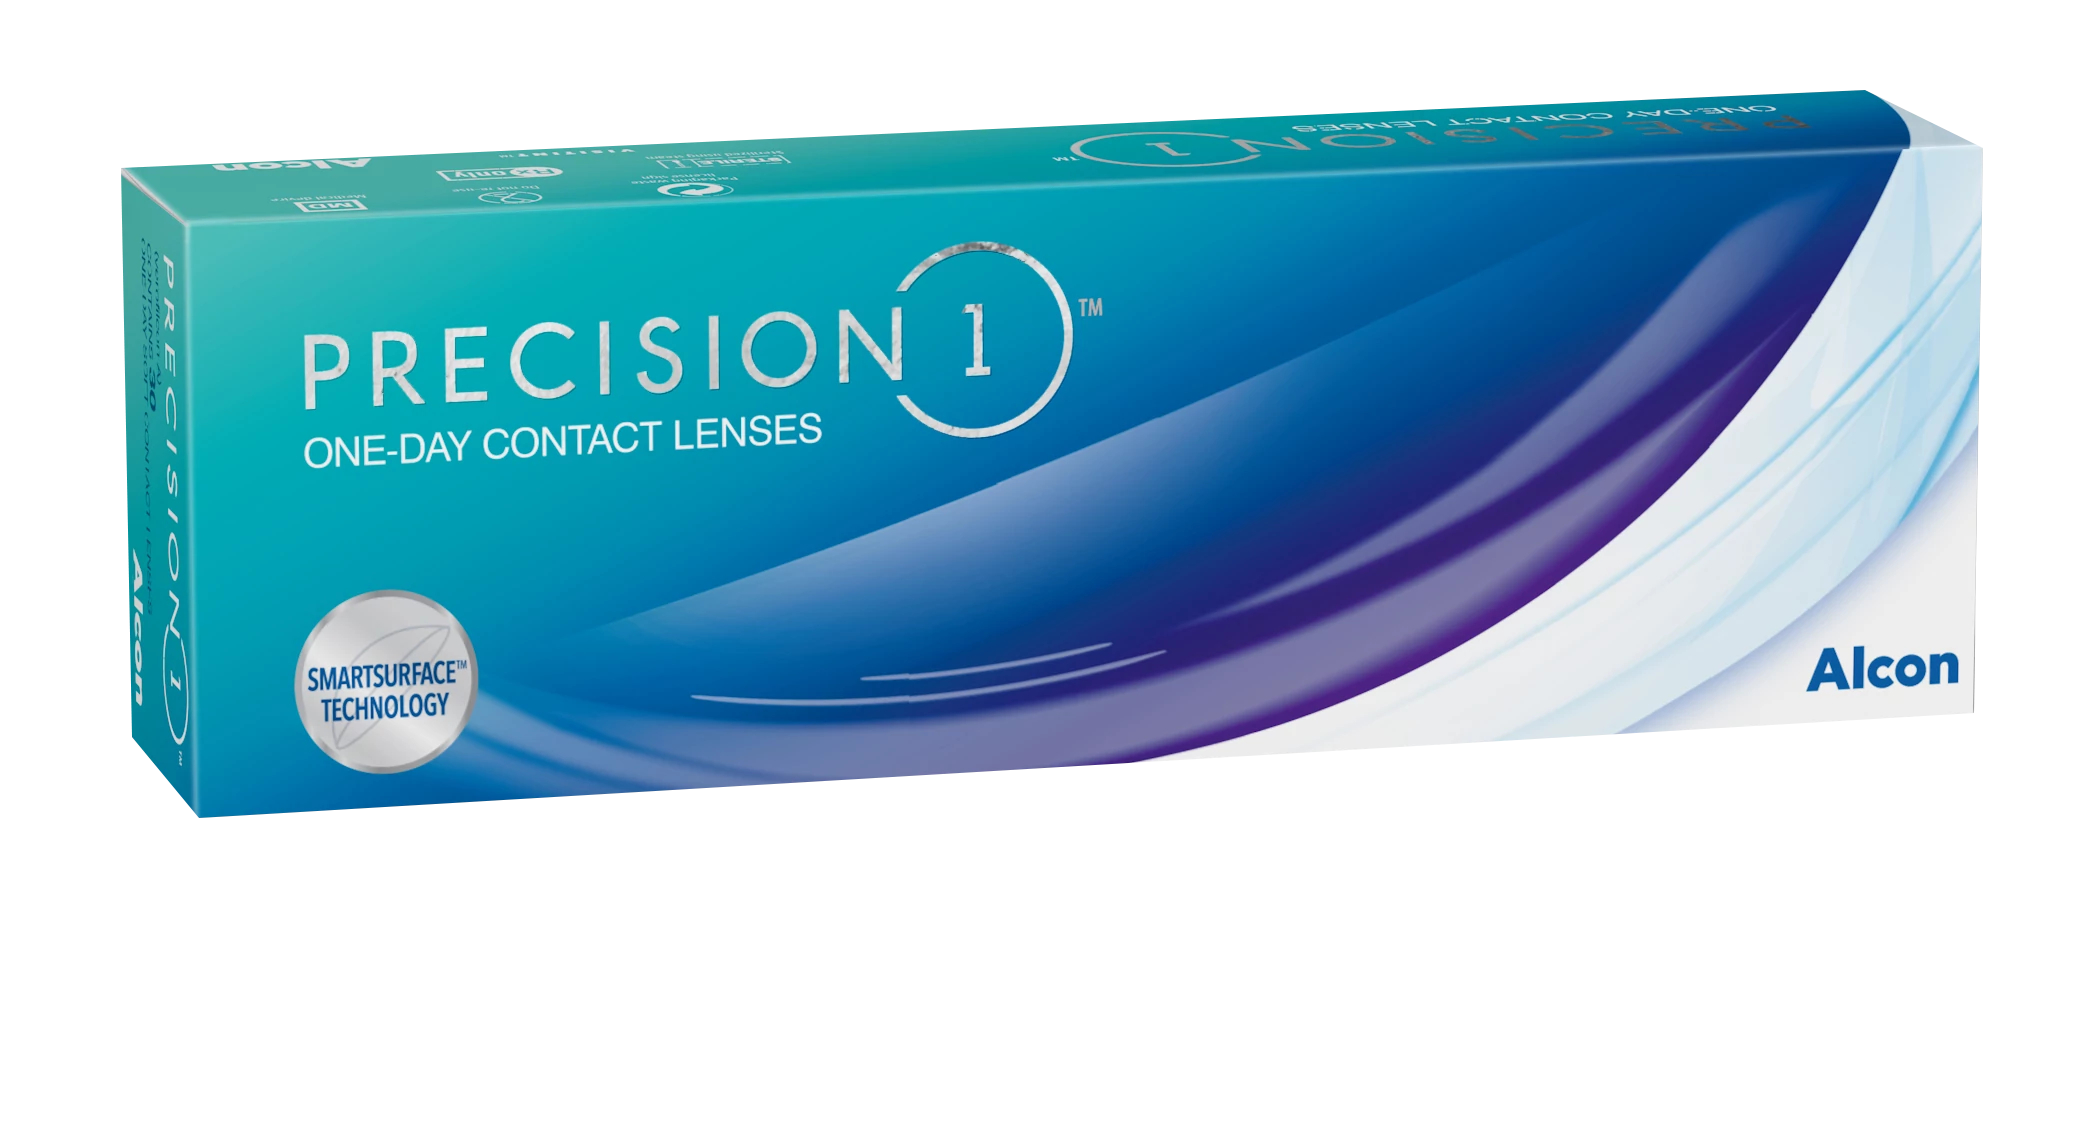 Alcon precision one contacts international investment law a changing landscape in healthcare